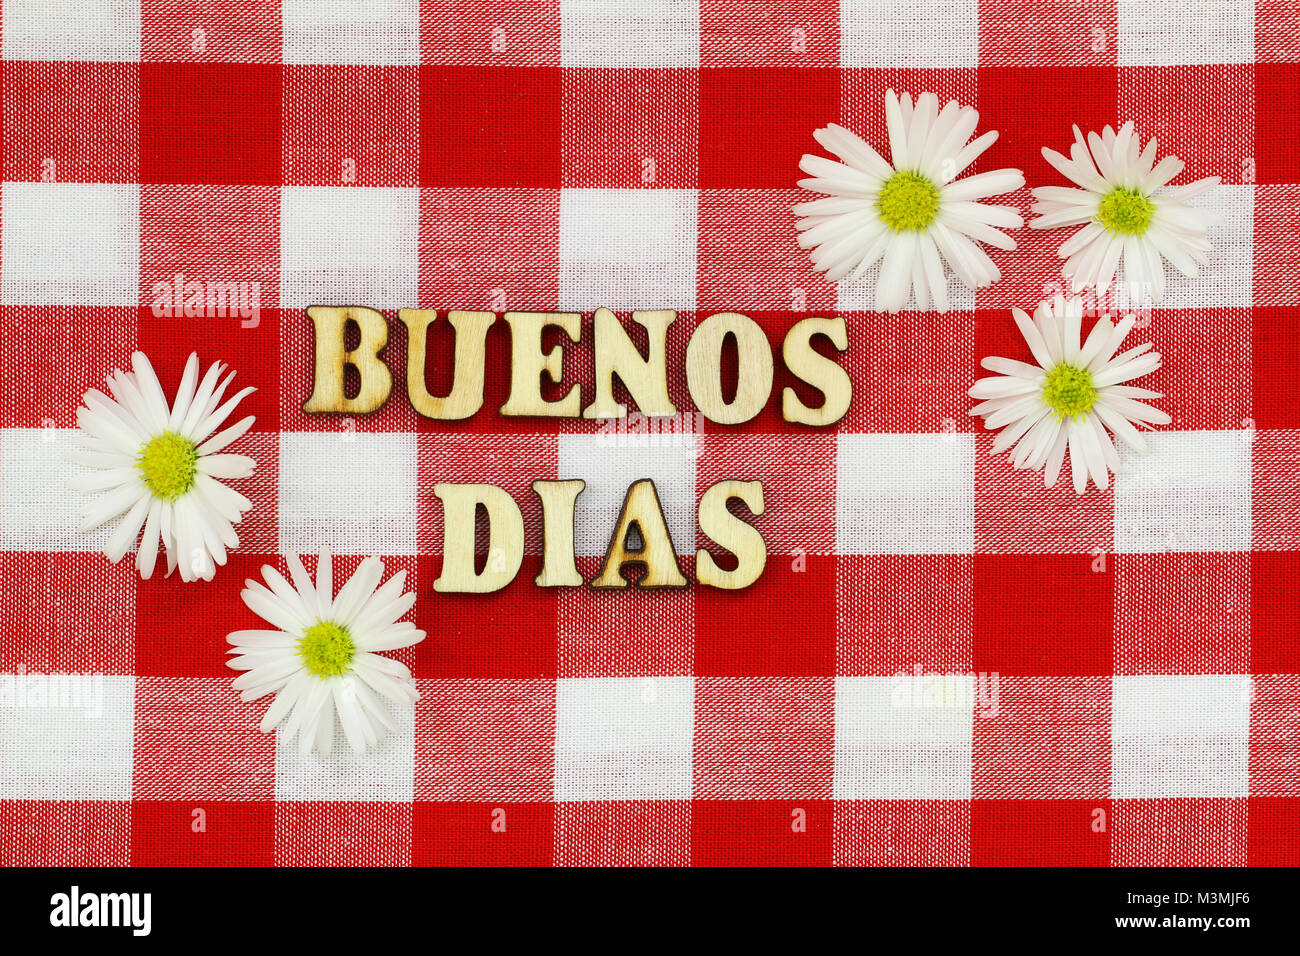 Buenos Dias (good morning in Spanish) written with wooden letters on red and white checkered cloth with daisy flowers Stock Photo